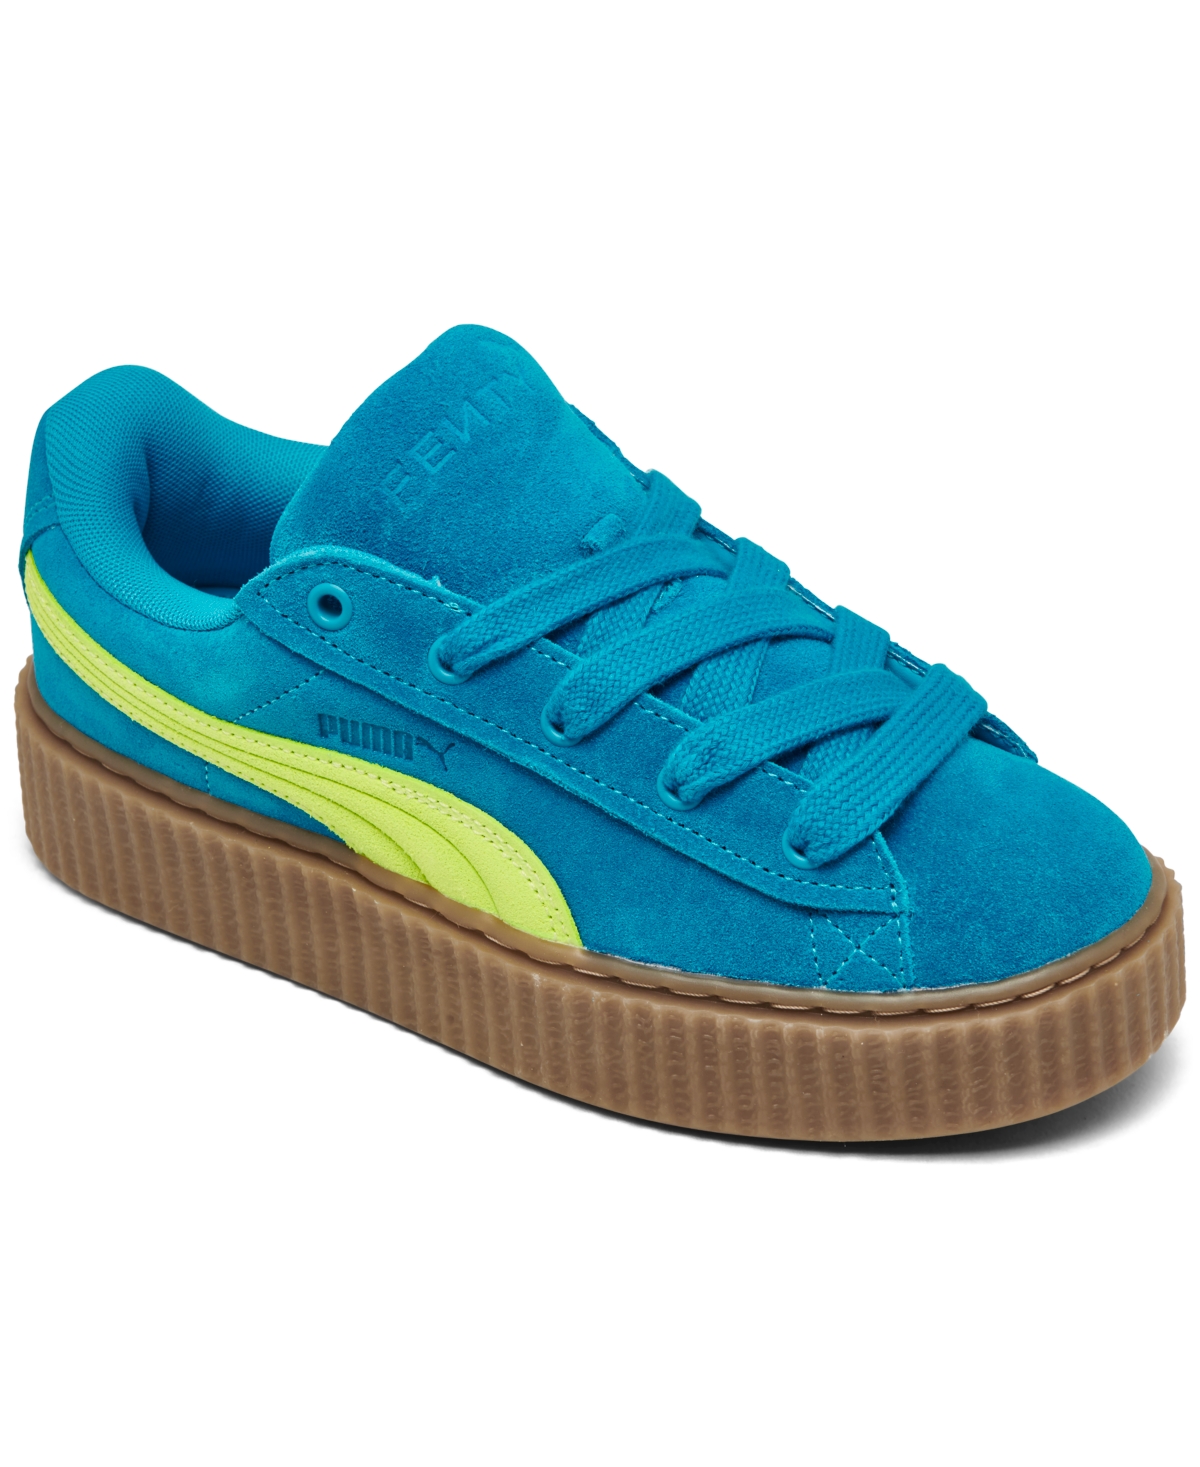 PUMA WOMEN'S FENTY CREEPER PHATTY CASUAL SNEAKERS FROM FINISH LINE